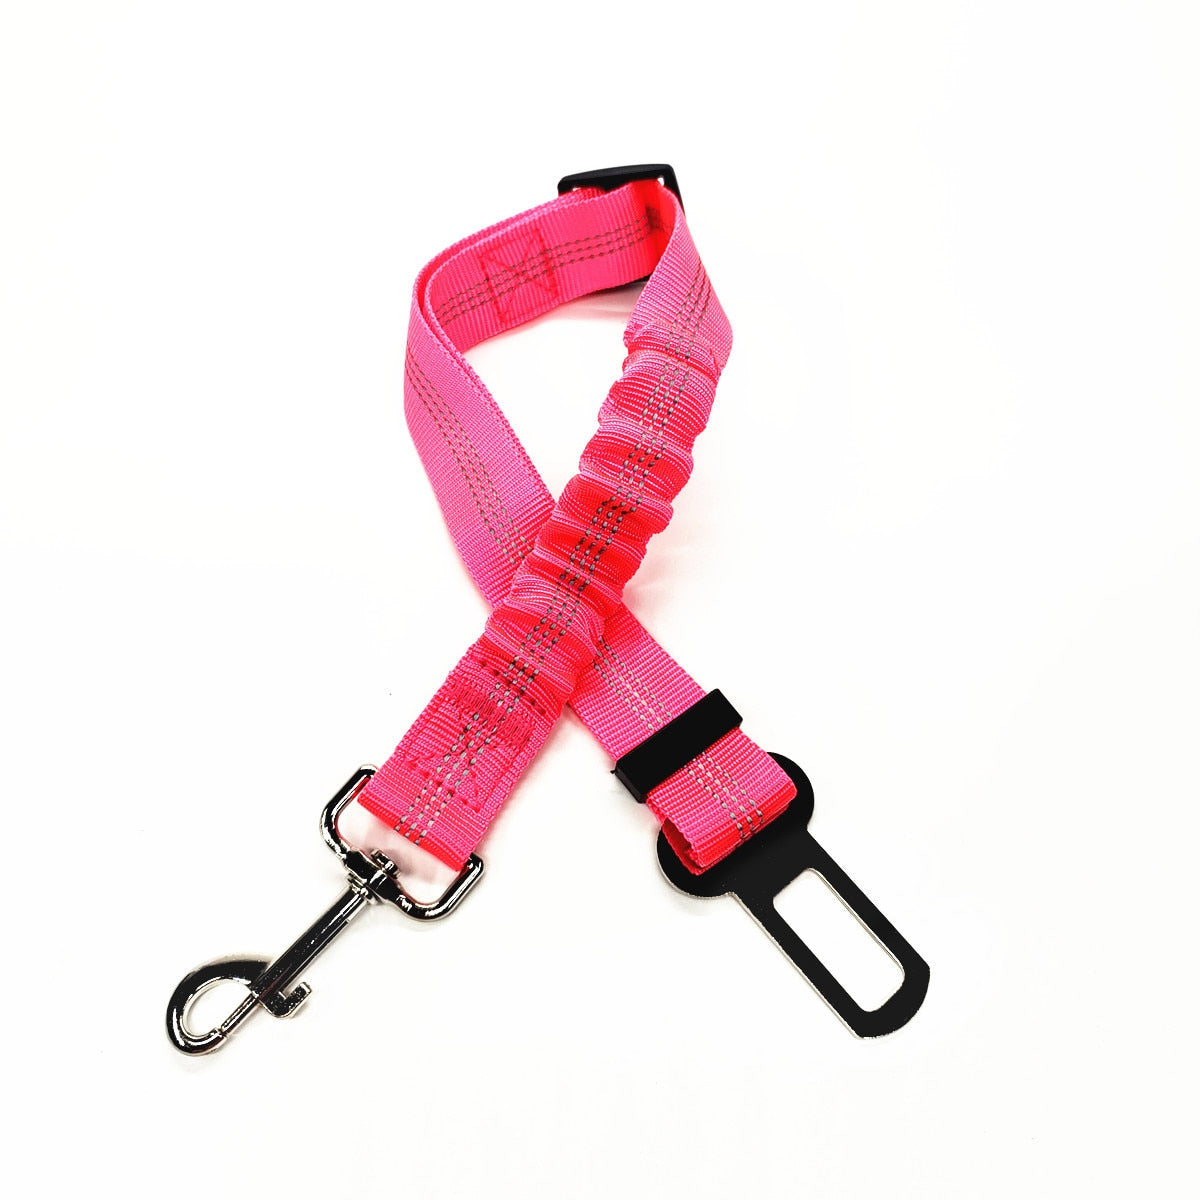 Adjustable Pet Car Seat Belt and Safety Harness for Cats and Dogs PetTech Paradise